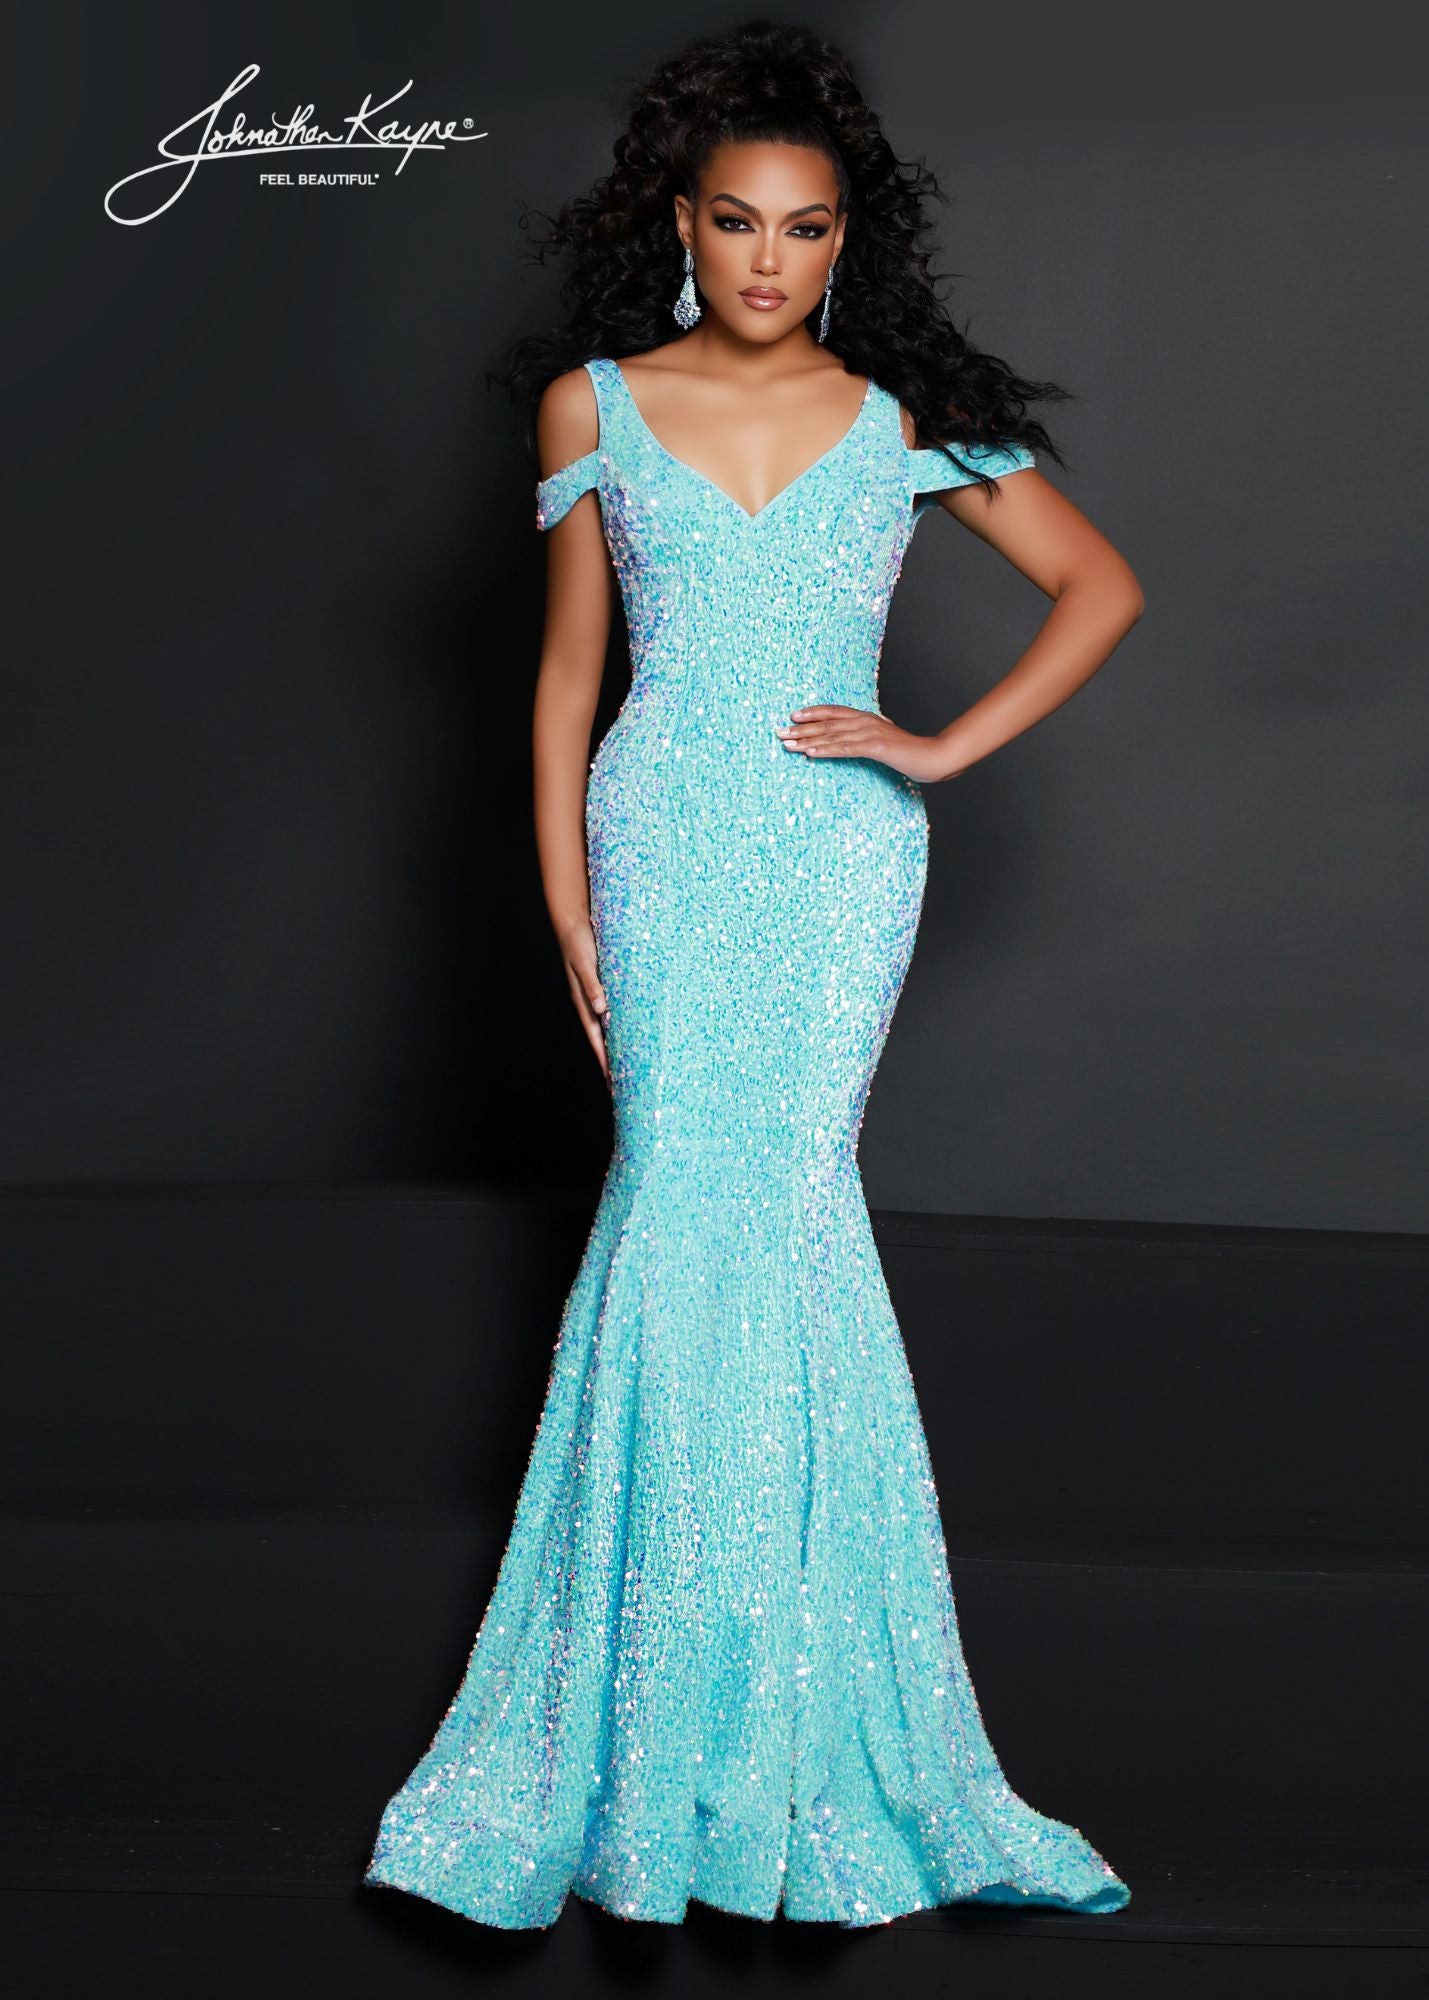 Johnathan Kayne 2678 sequin stretch velvet prom dress with off shoulder straps Lush Mermaid skirt and train perfect for Pageants  Colors: Aqua, Magenta, Multi, Red  Sizes: 00,0,2,4,6,8,10,12,14,16,18